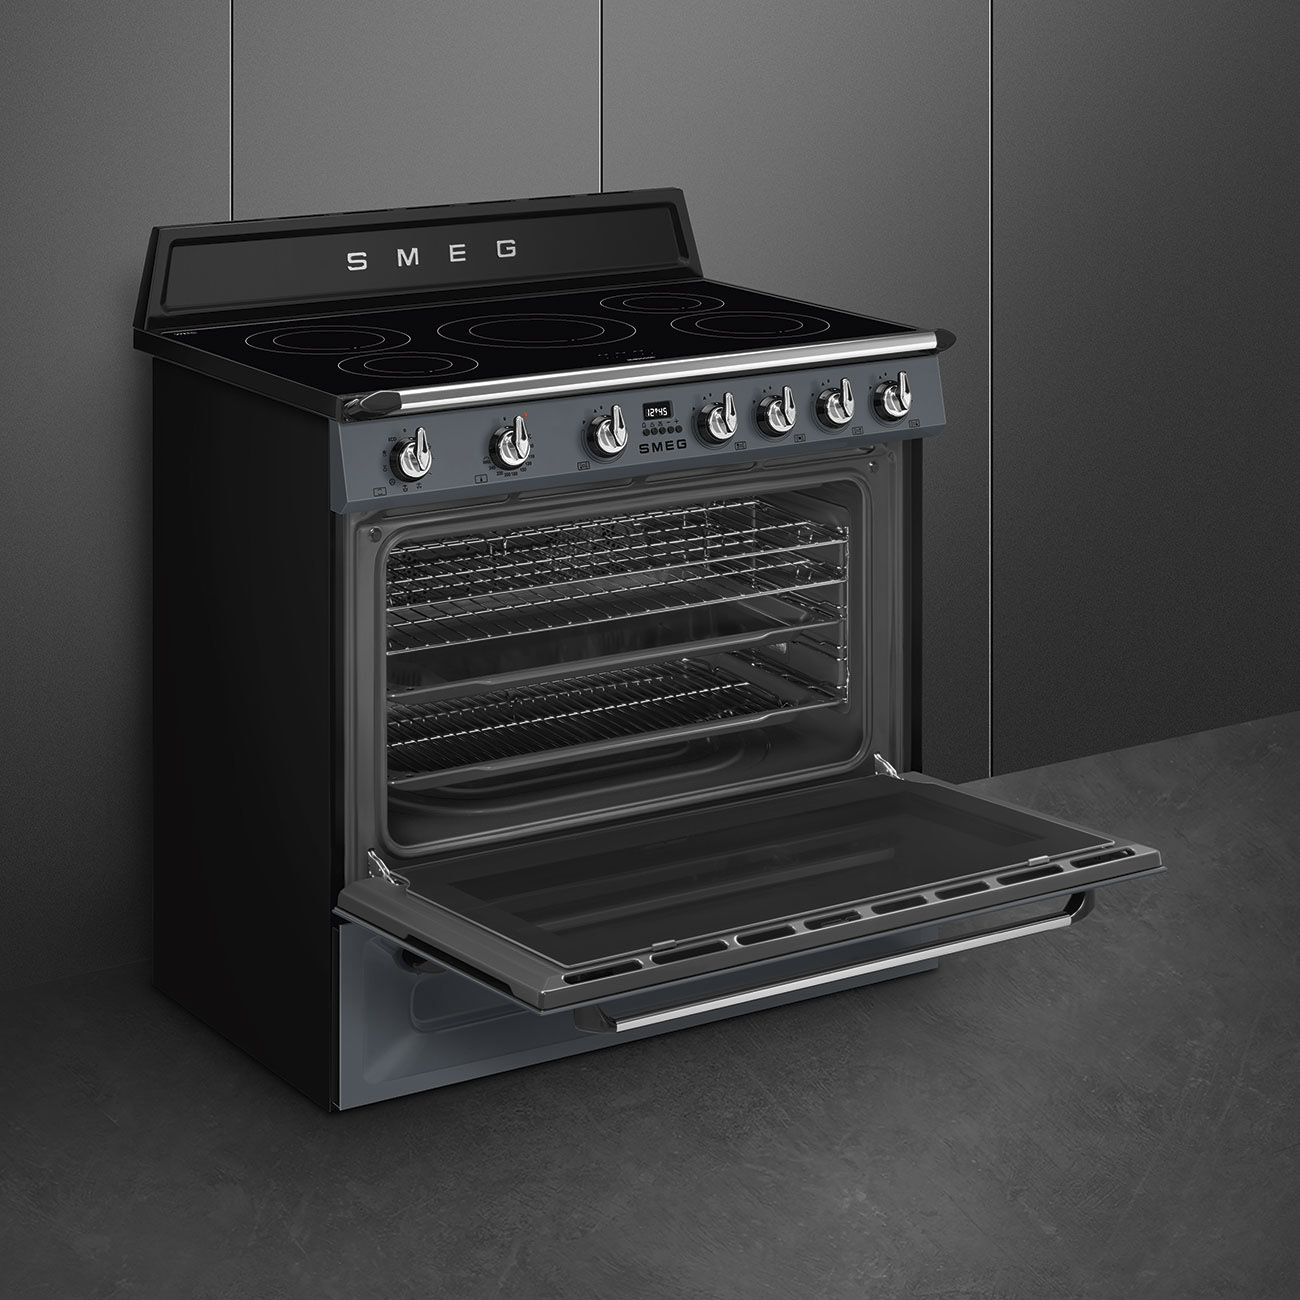 Smeg Slate Grey Cooker with Induction Hob_5